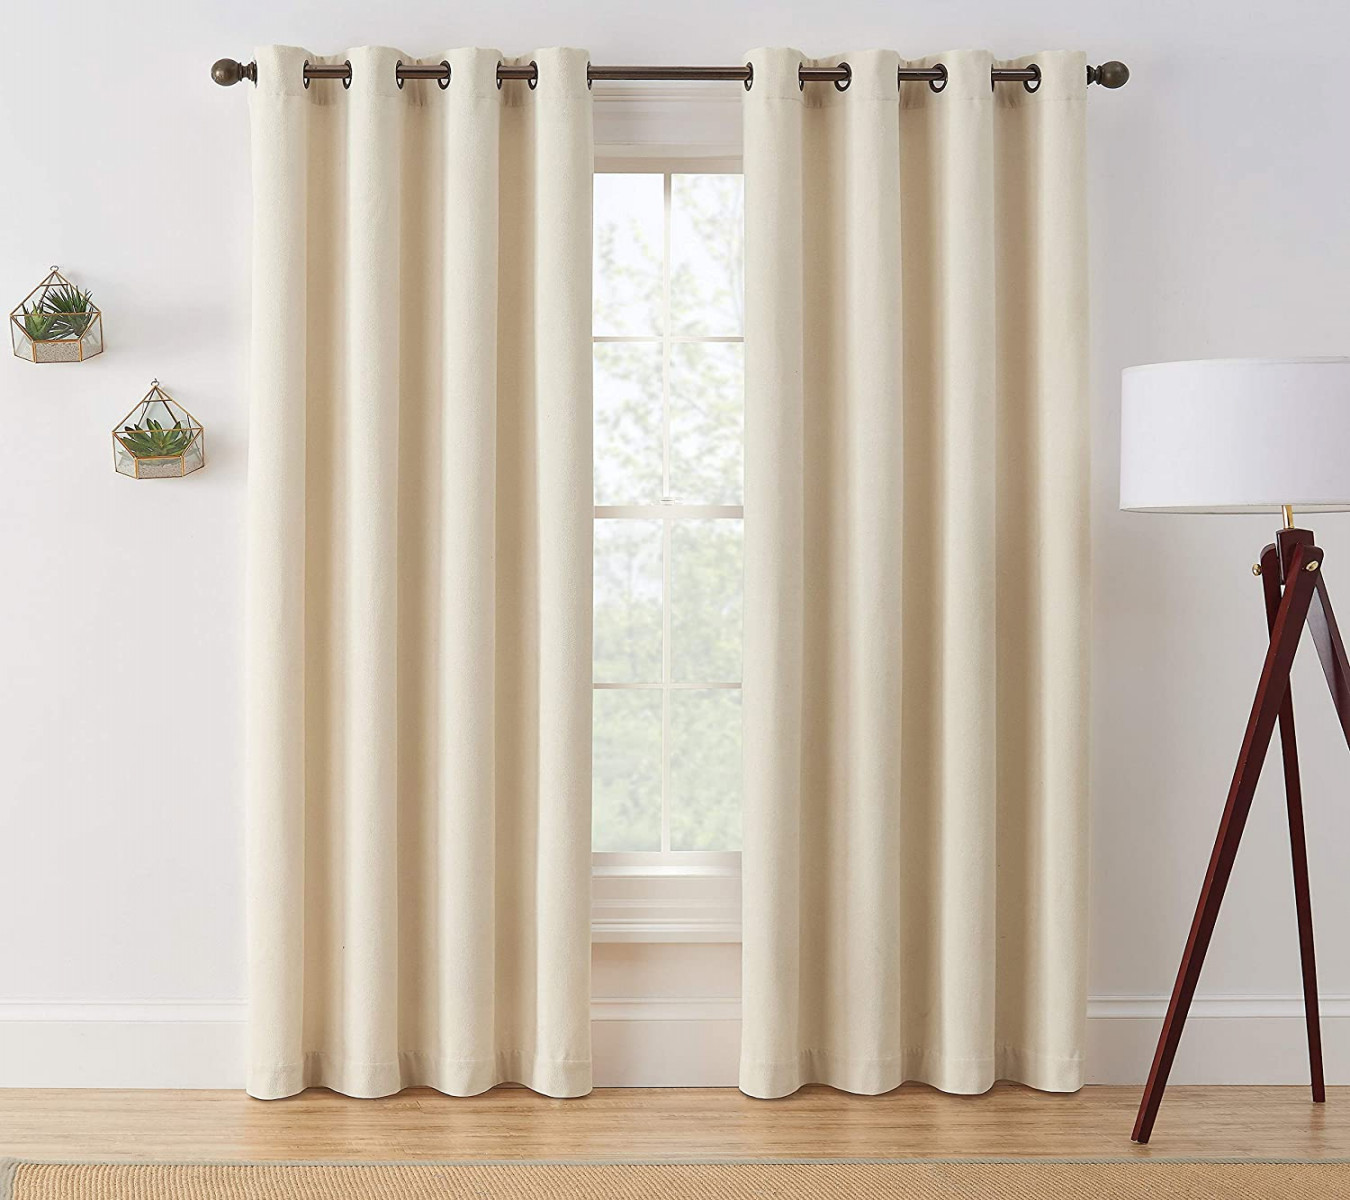 Brookstone Marco Mid Century Modern Blackout Curtains with Lining for  Bedroom " x " - Ivory